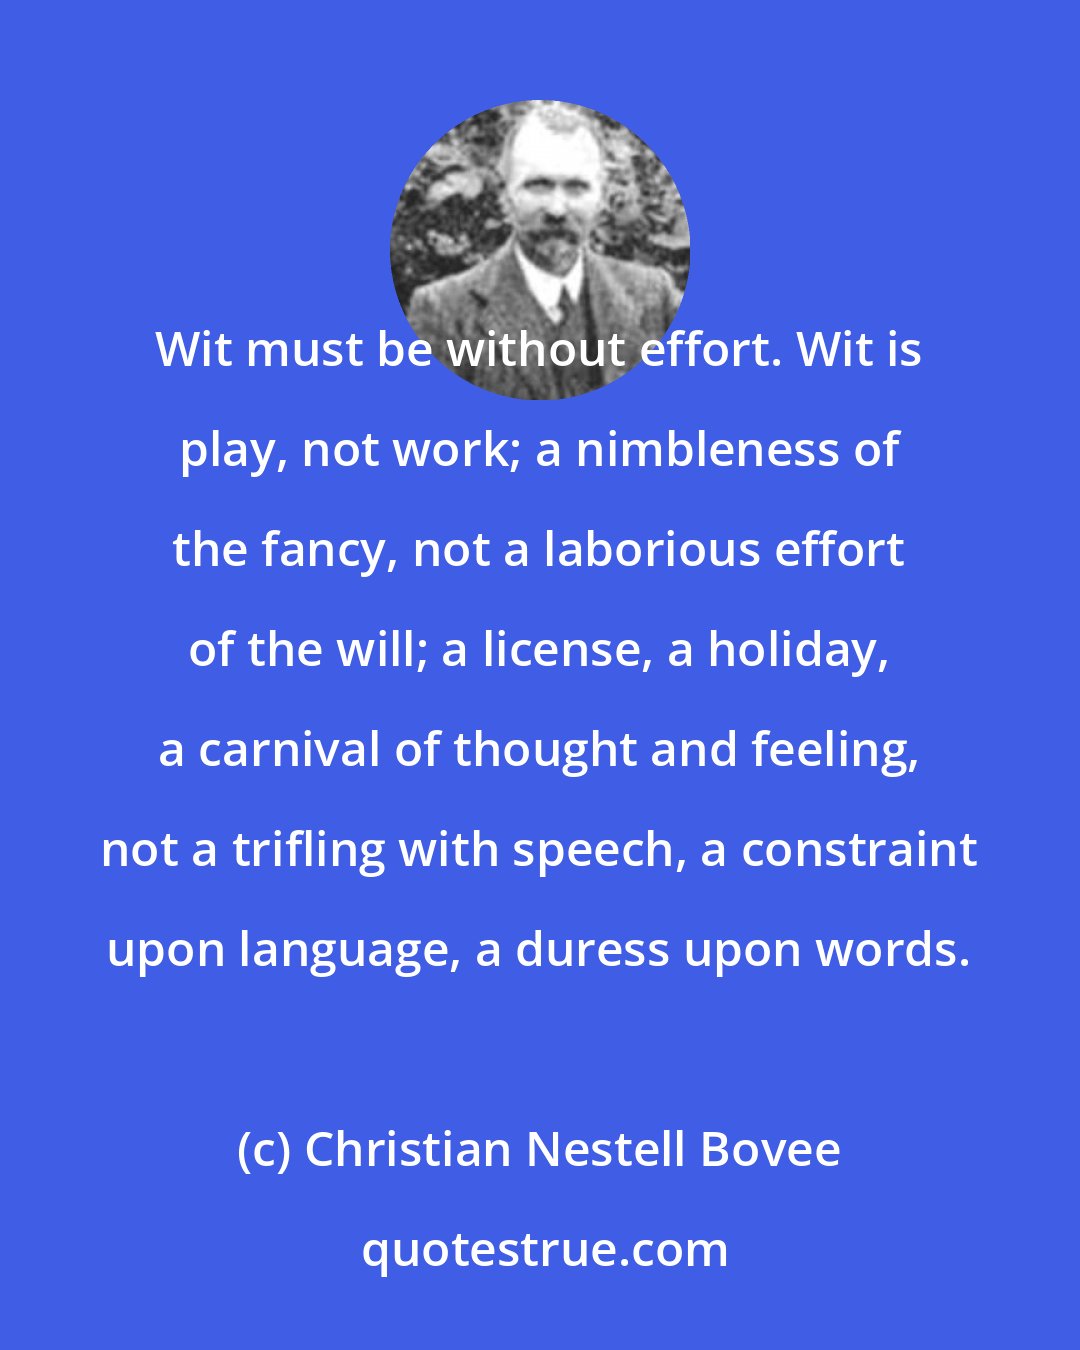 Christian Nestell Bovee: Wit must be without effort. Wit is play, not work; a nimbleness of the fancy, not a laborious effort of the will; a license, a holiday, a carnival of thought and feeling, not a trifling with speech, a constraint upon language, a duress upon words.